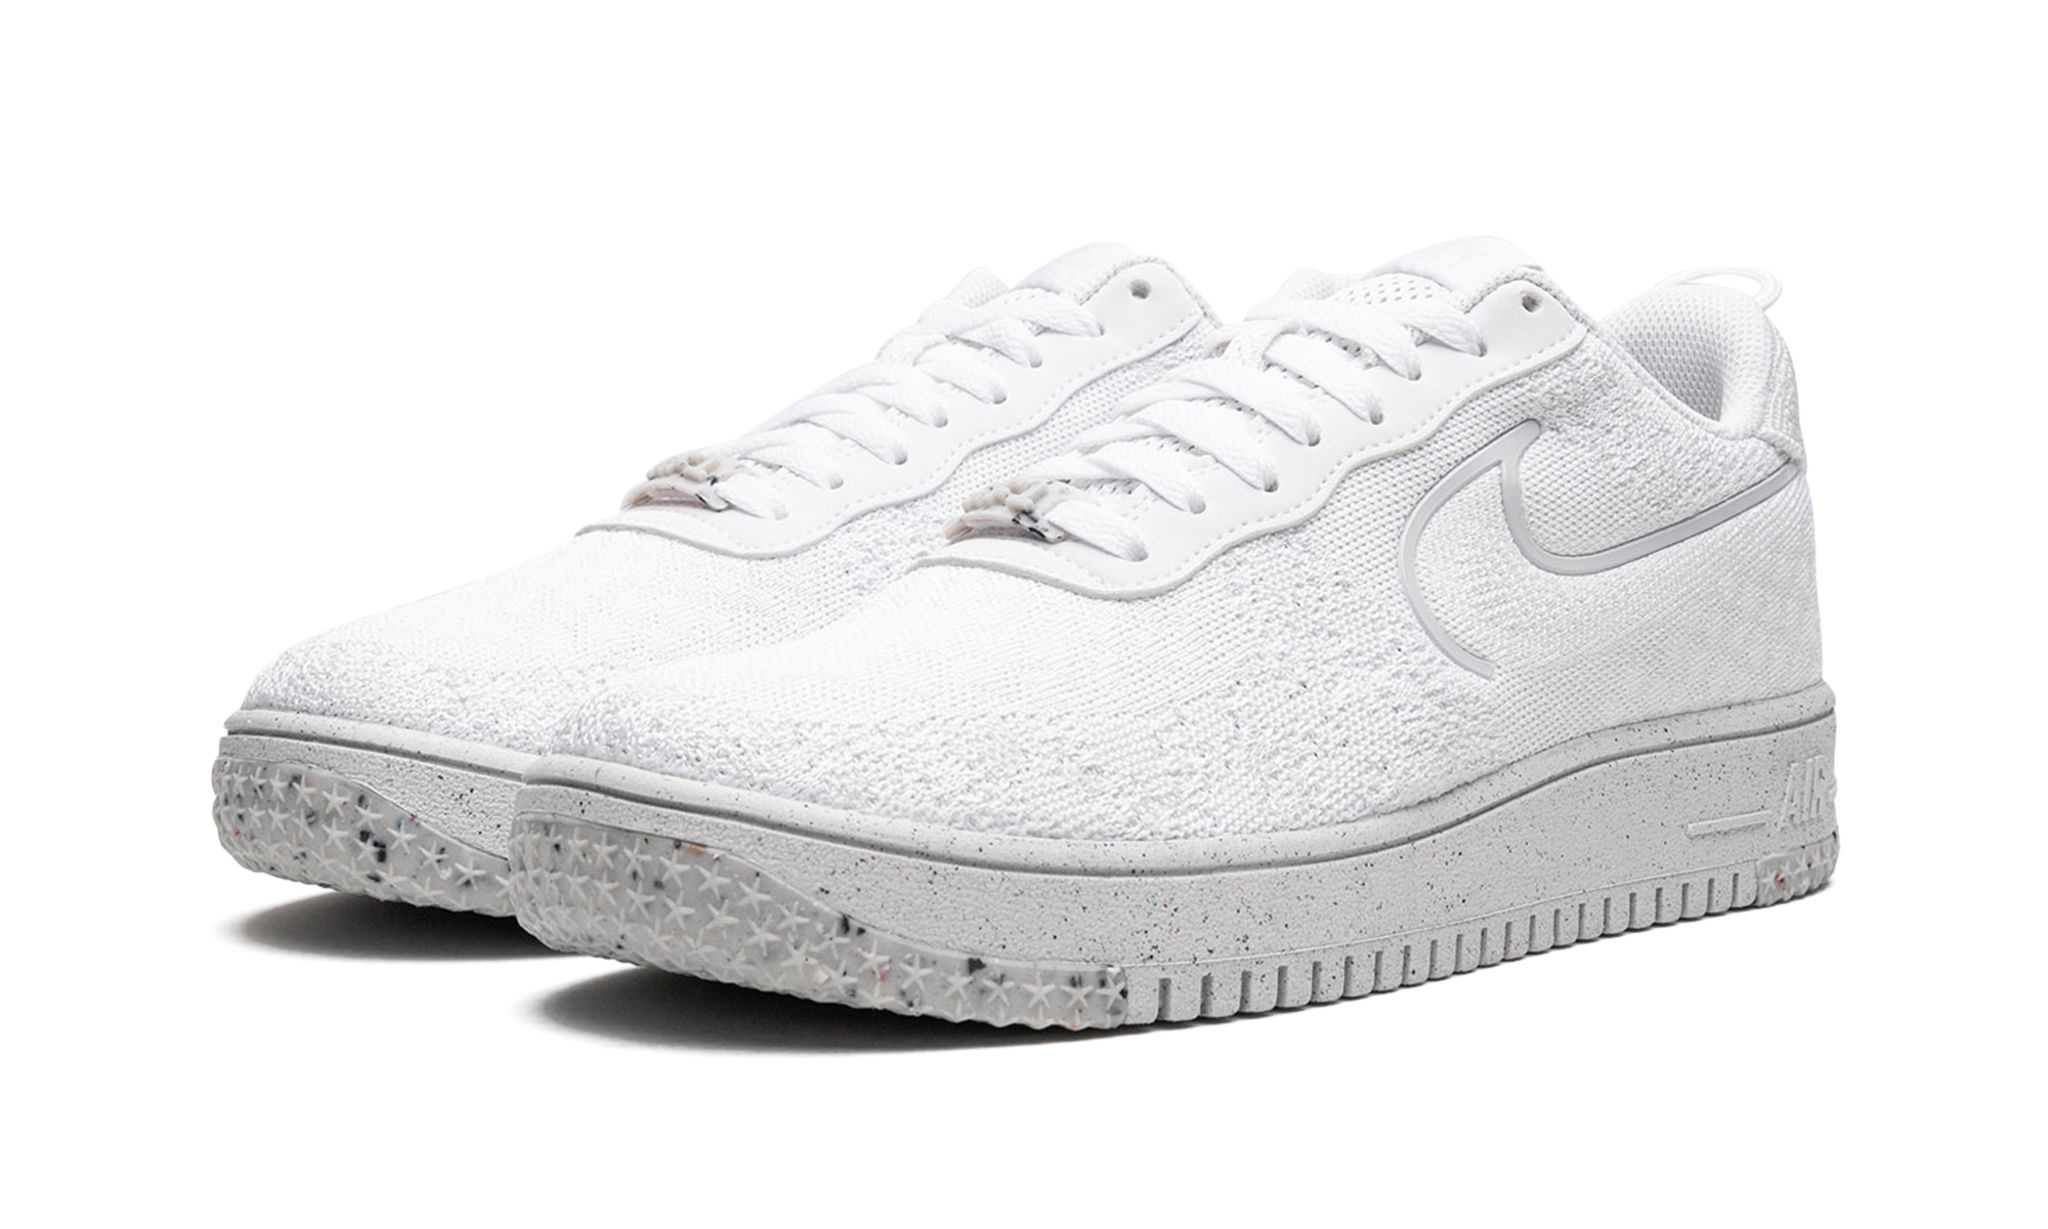 AF1 CRATER FLYKNIT NN "Whiteout" - 2